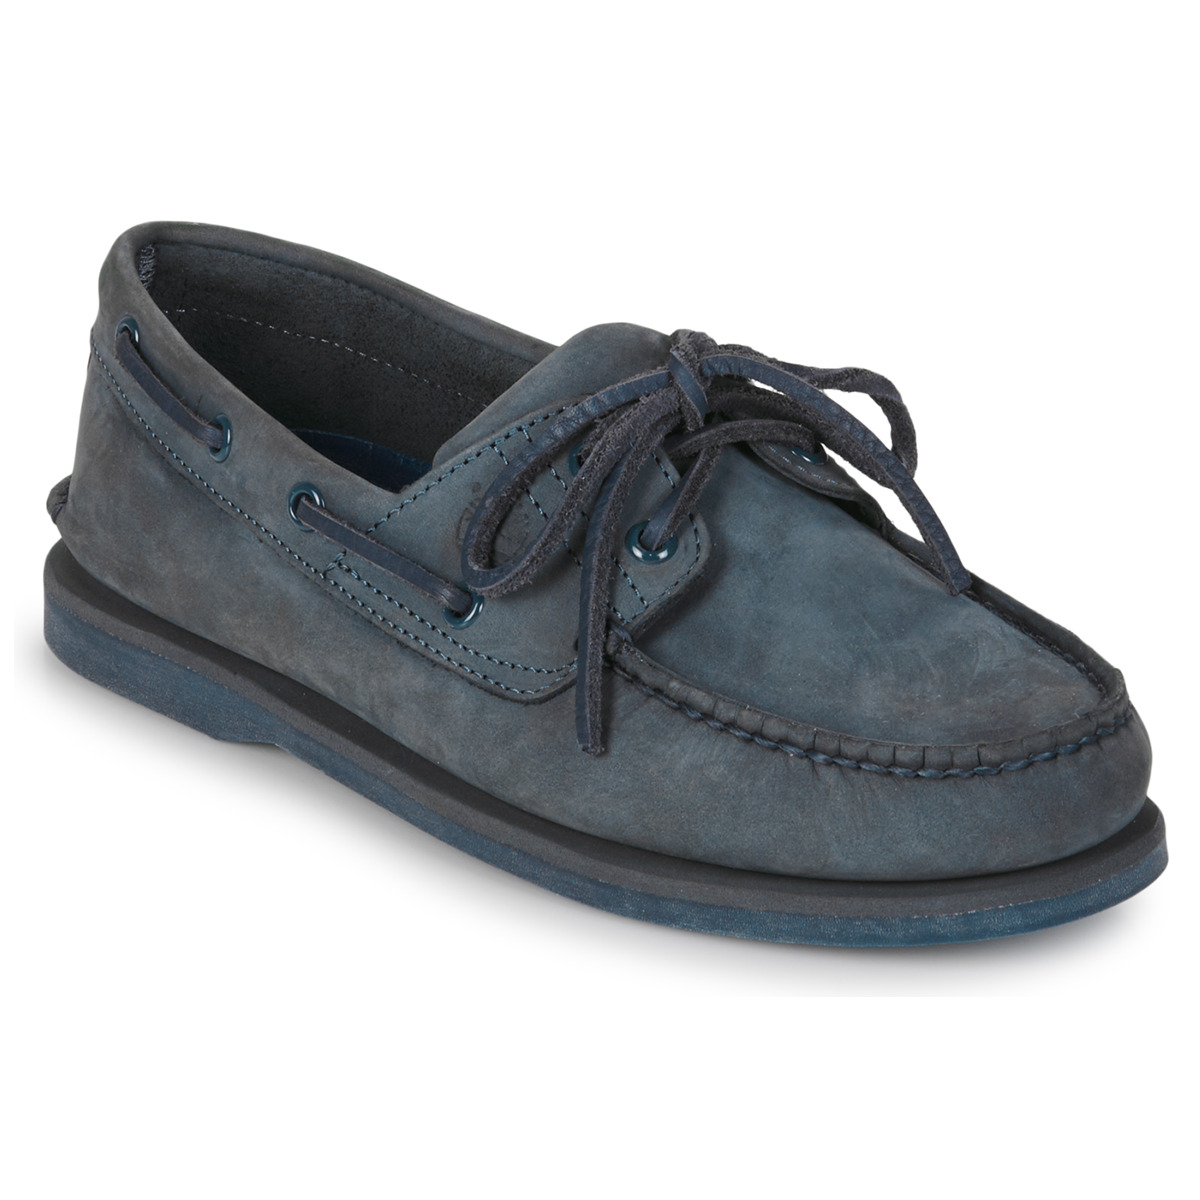 Boat shoes Timberland CLASSIC BOAT